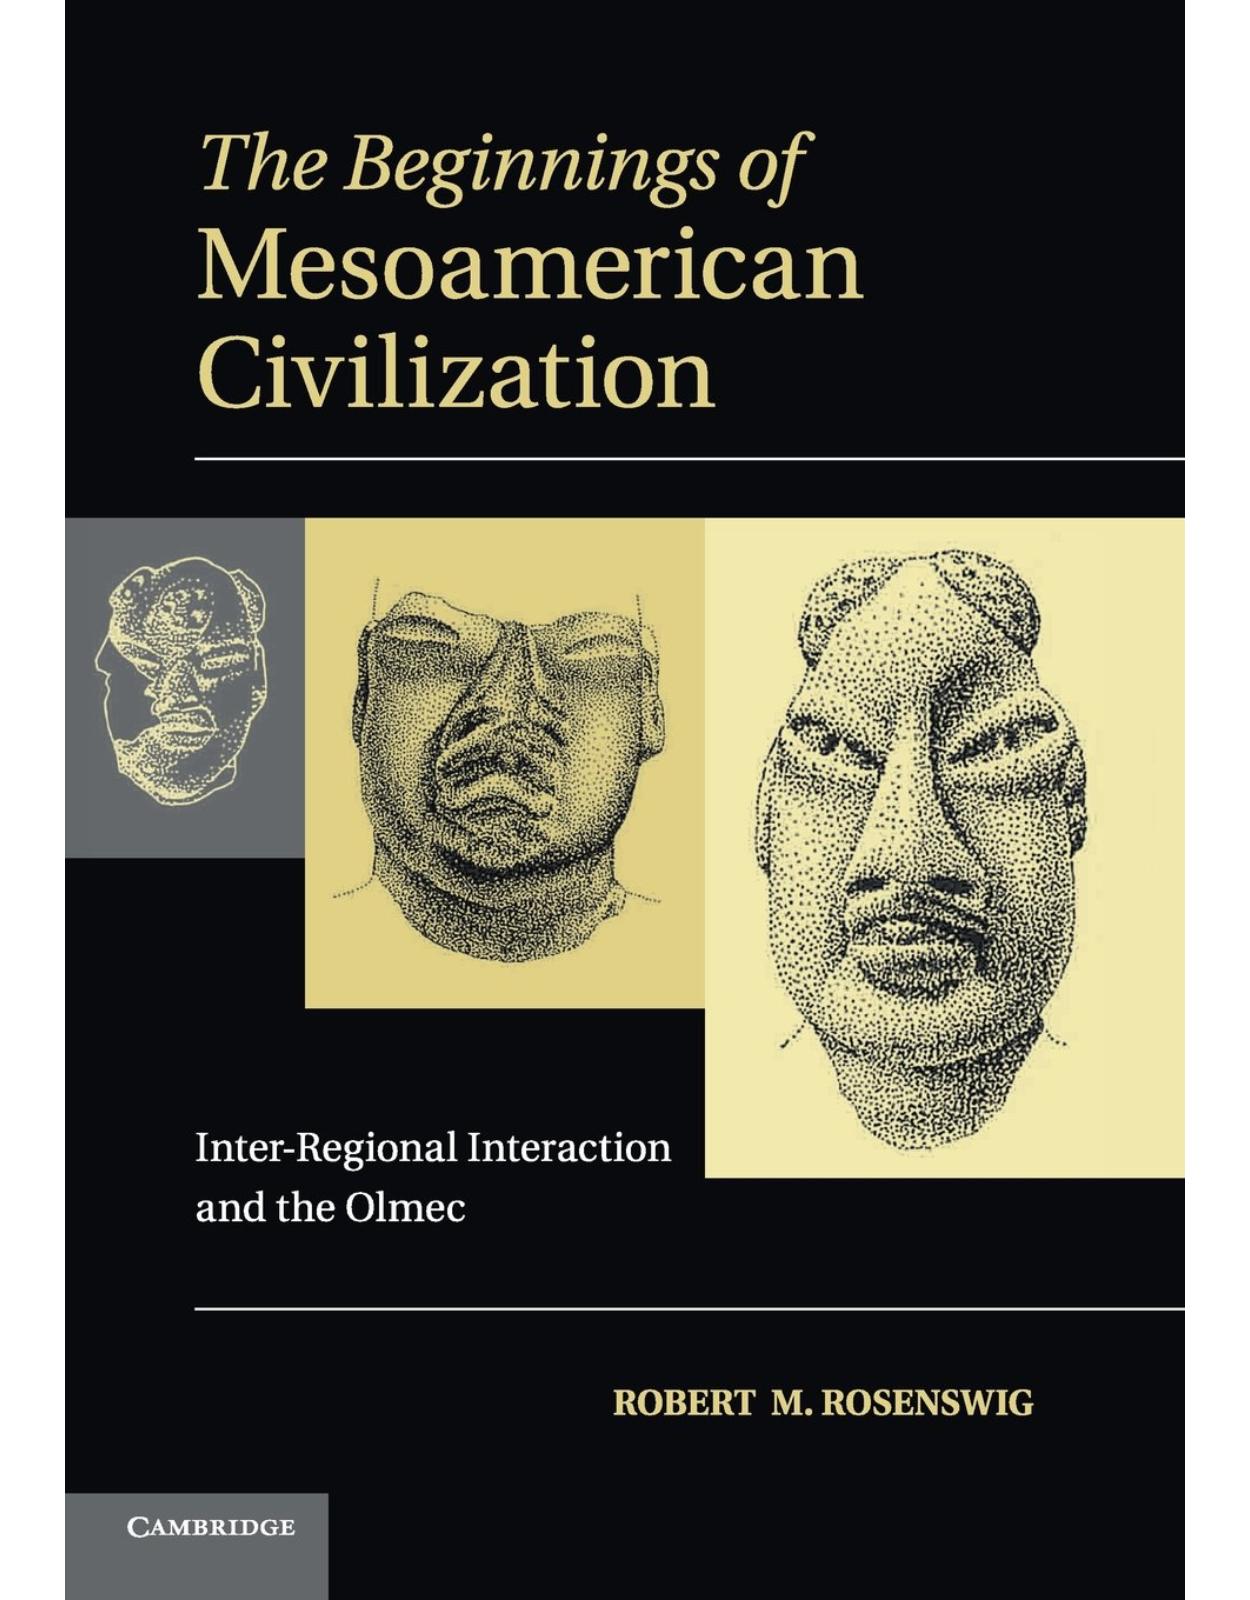 The Beginnings of Mesoamerican Civilization: Inter-Regional Interaction and the Olmec